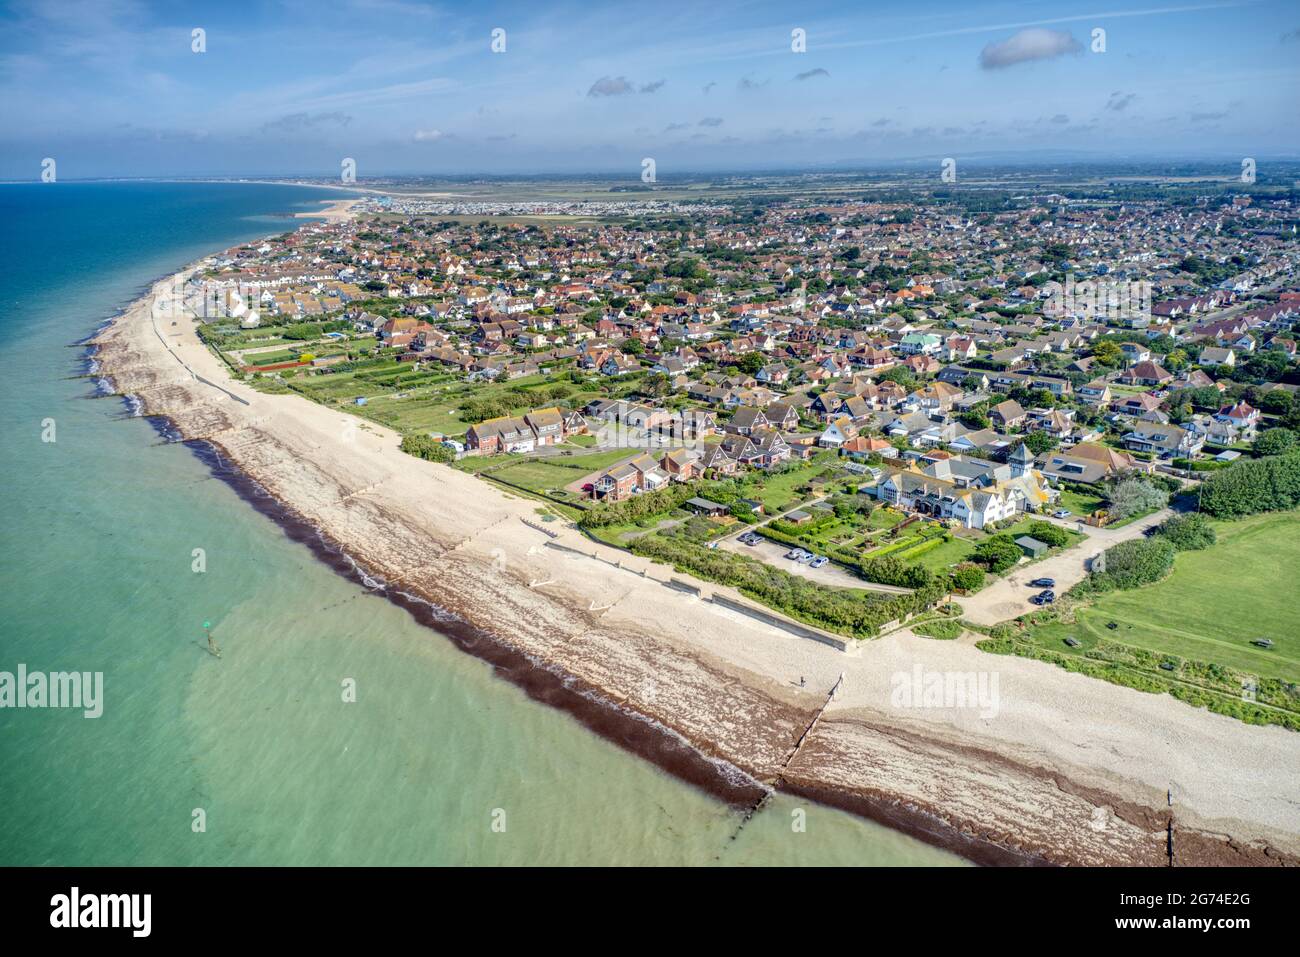 Selsey Bill Aerial View Over South Beach And The Popular Seaside Resort Town Of Selsey In West